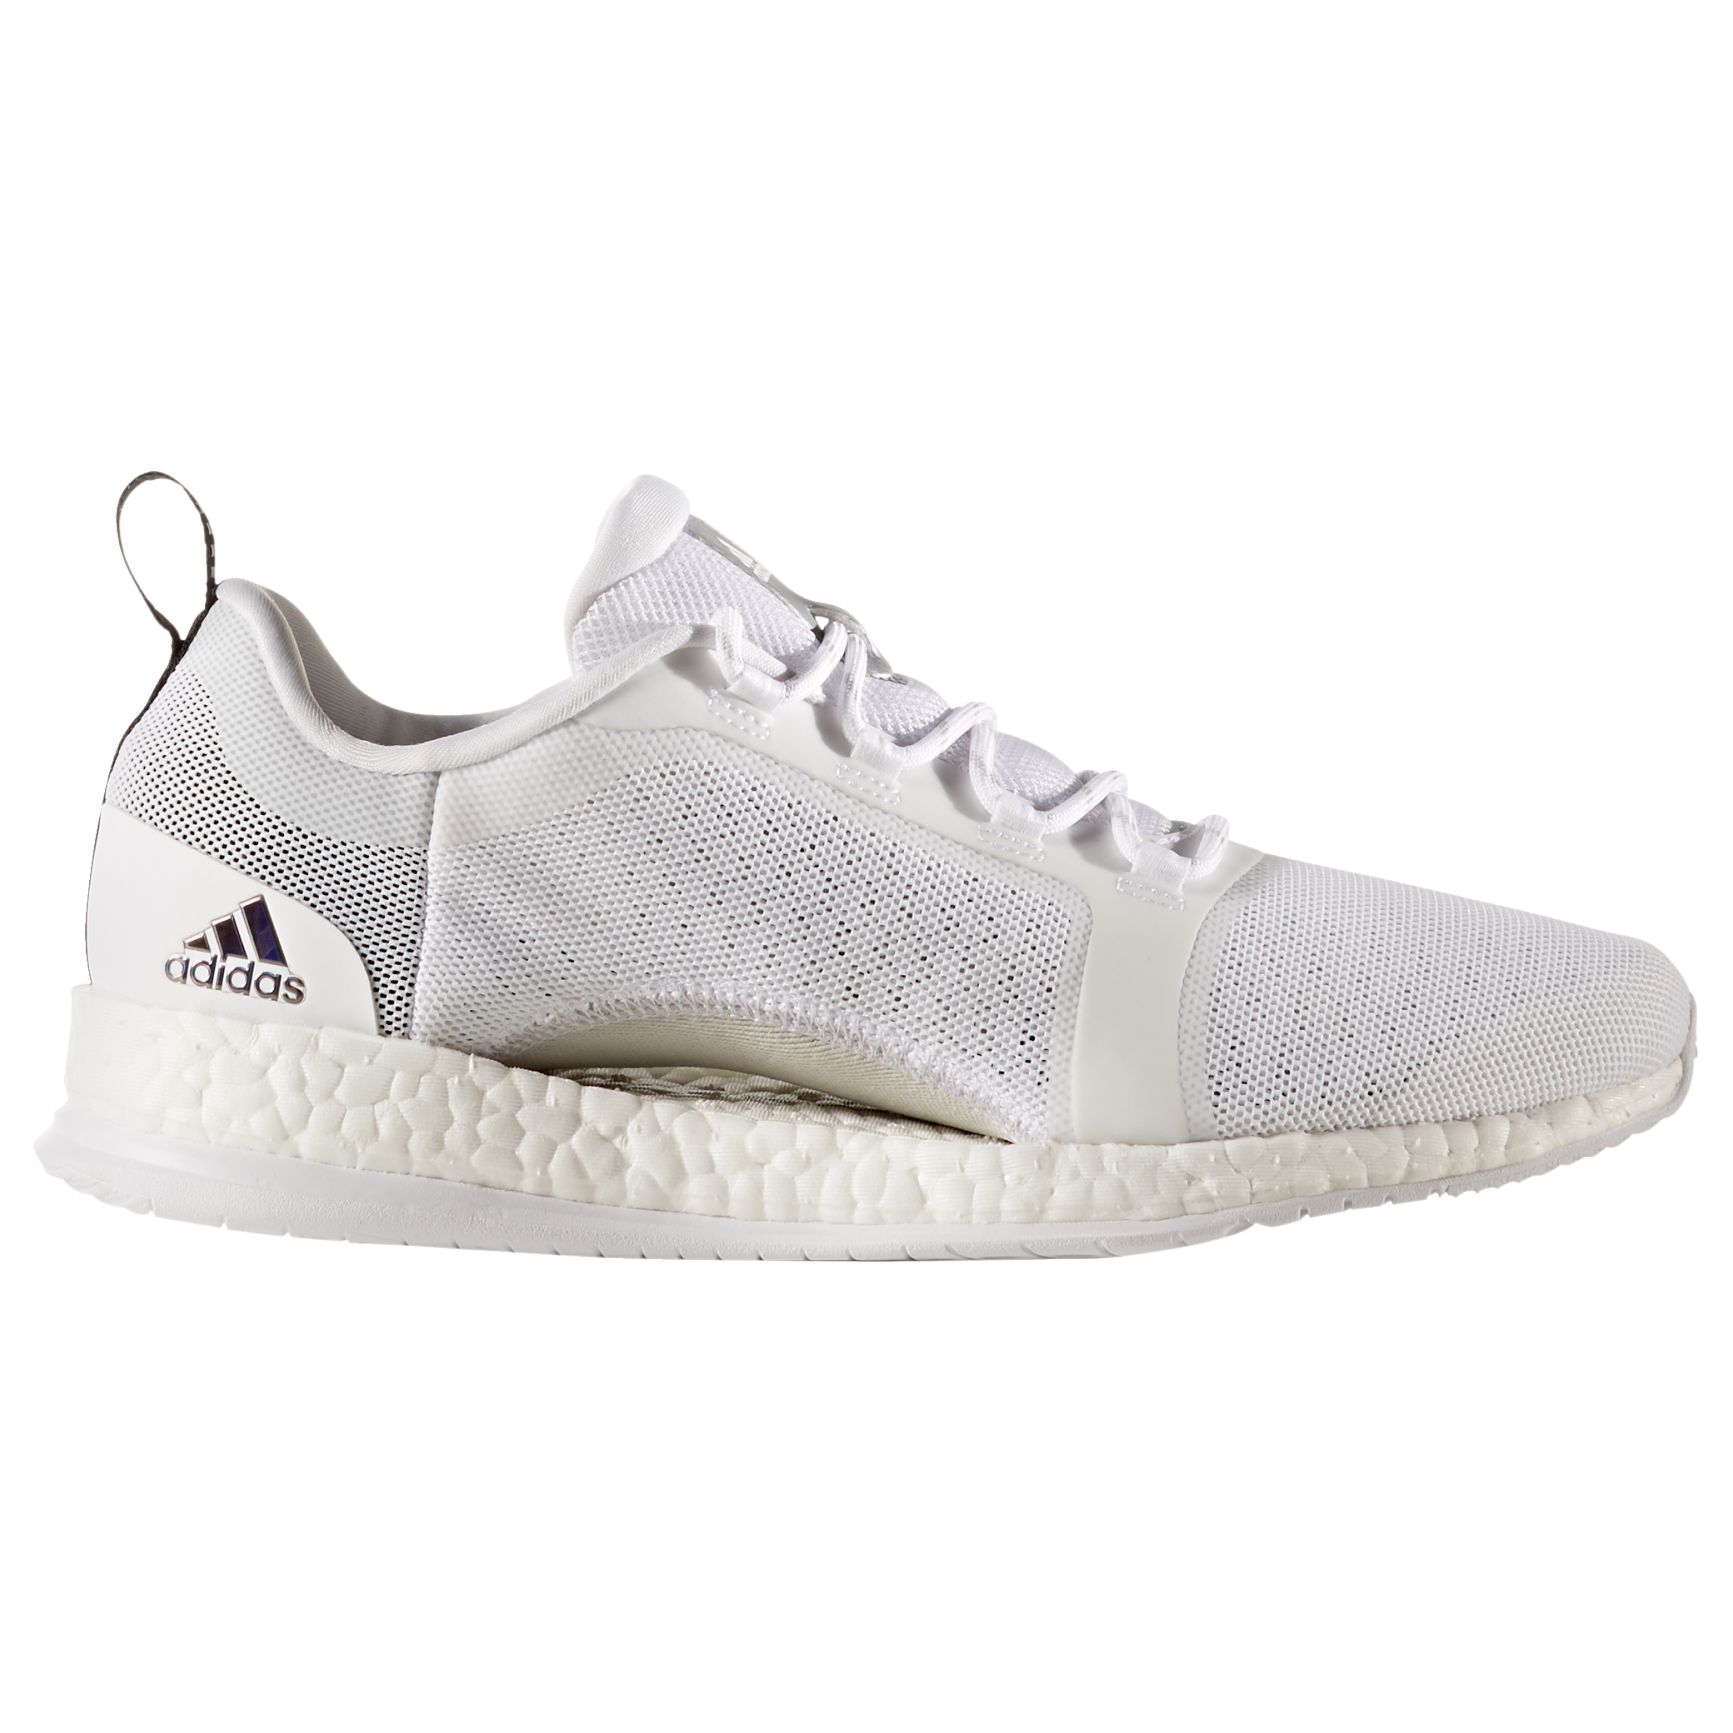 pure white trainers womens